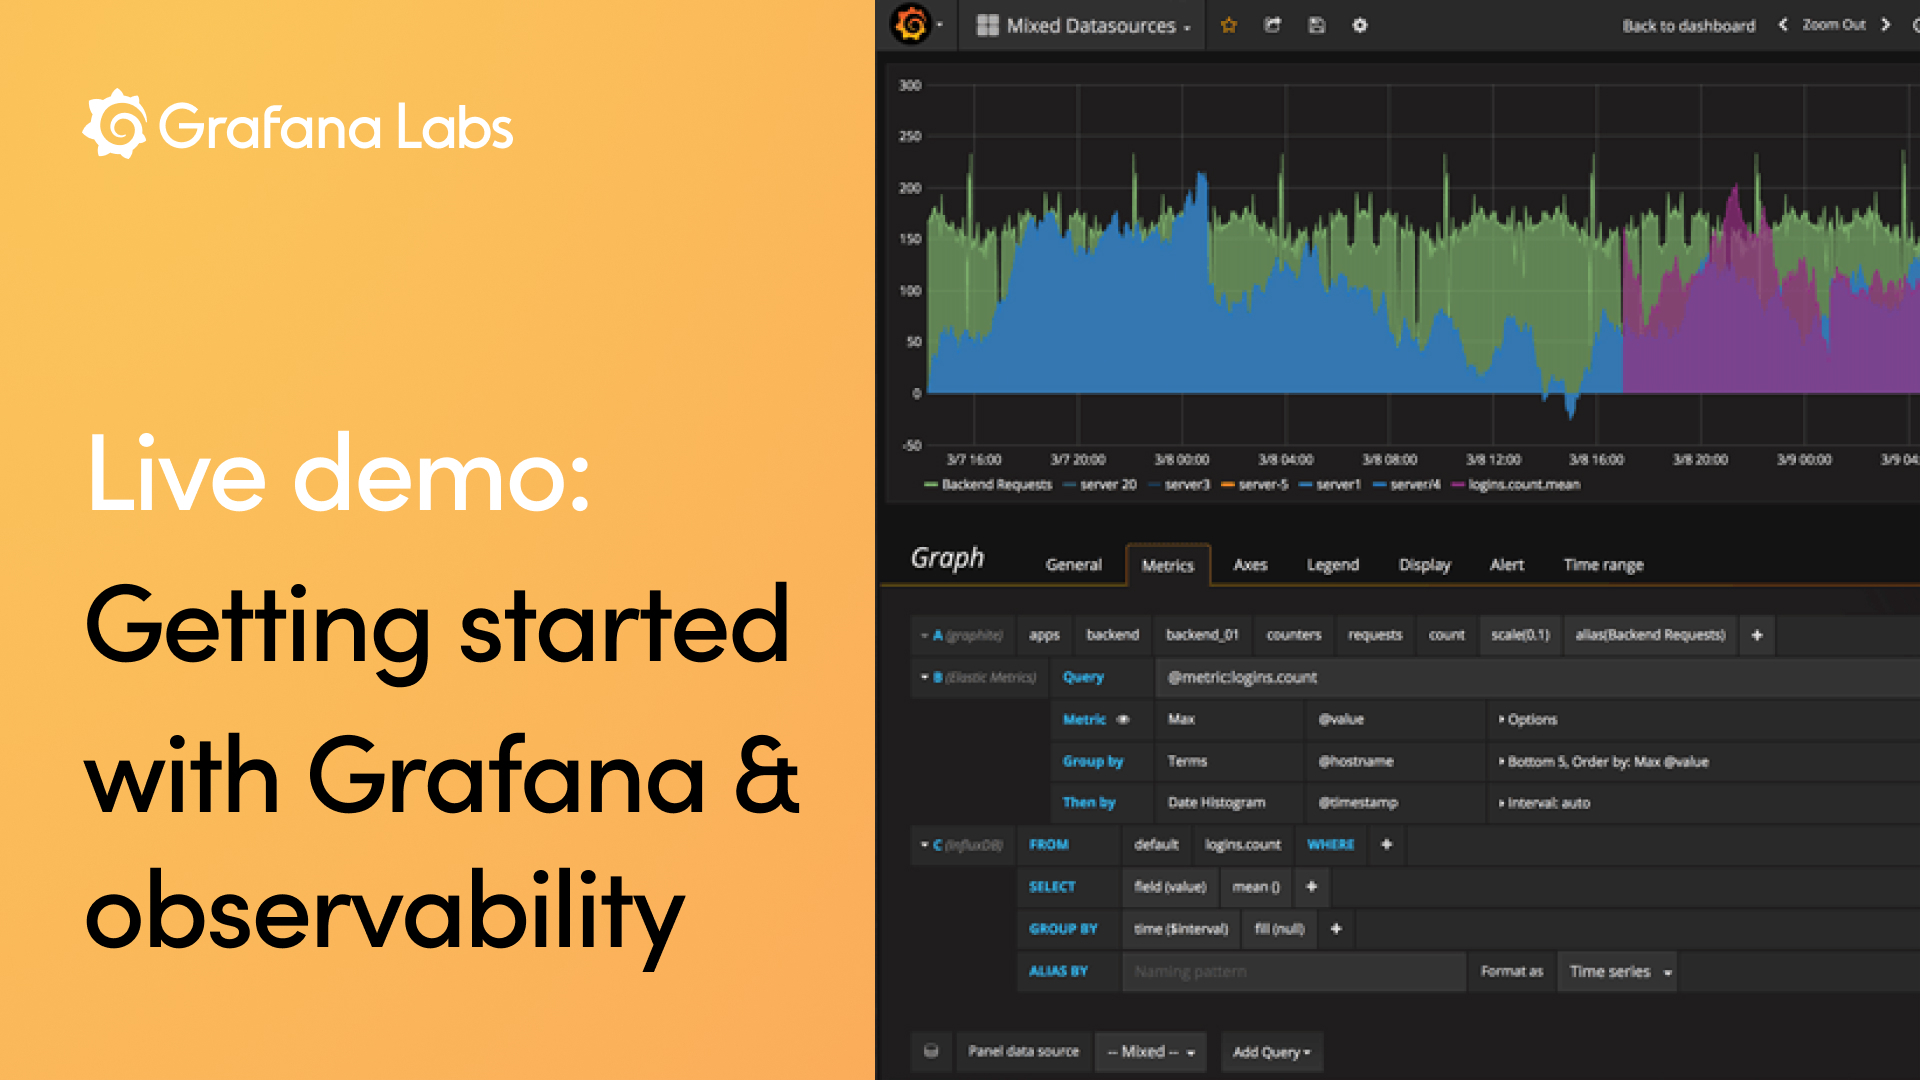 Getting started with Grafana Enterprise and observability